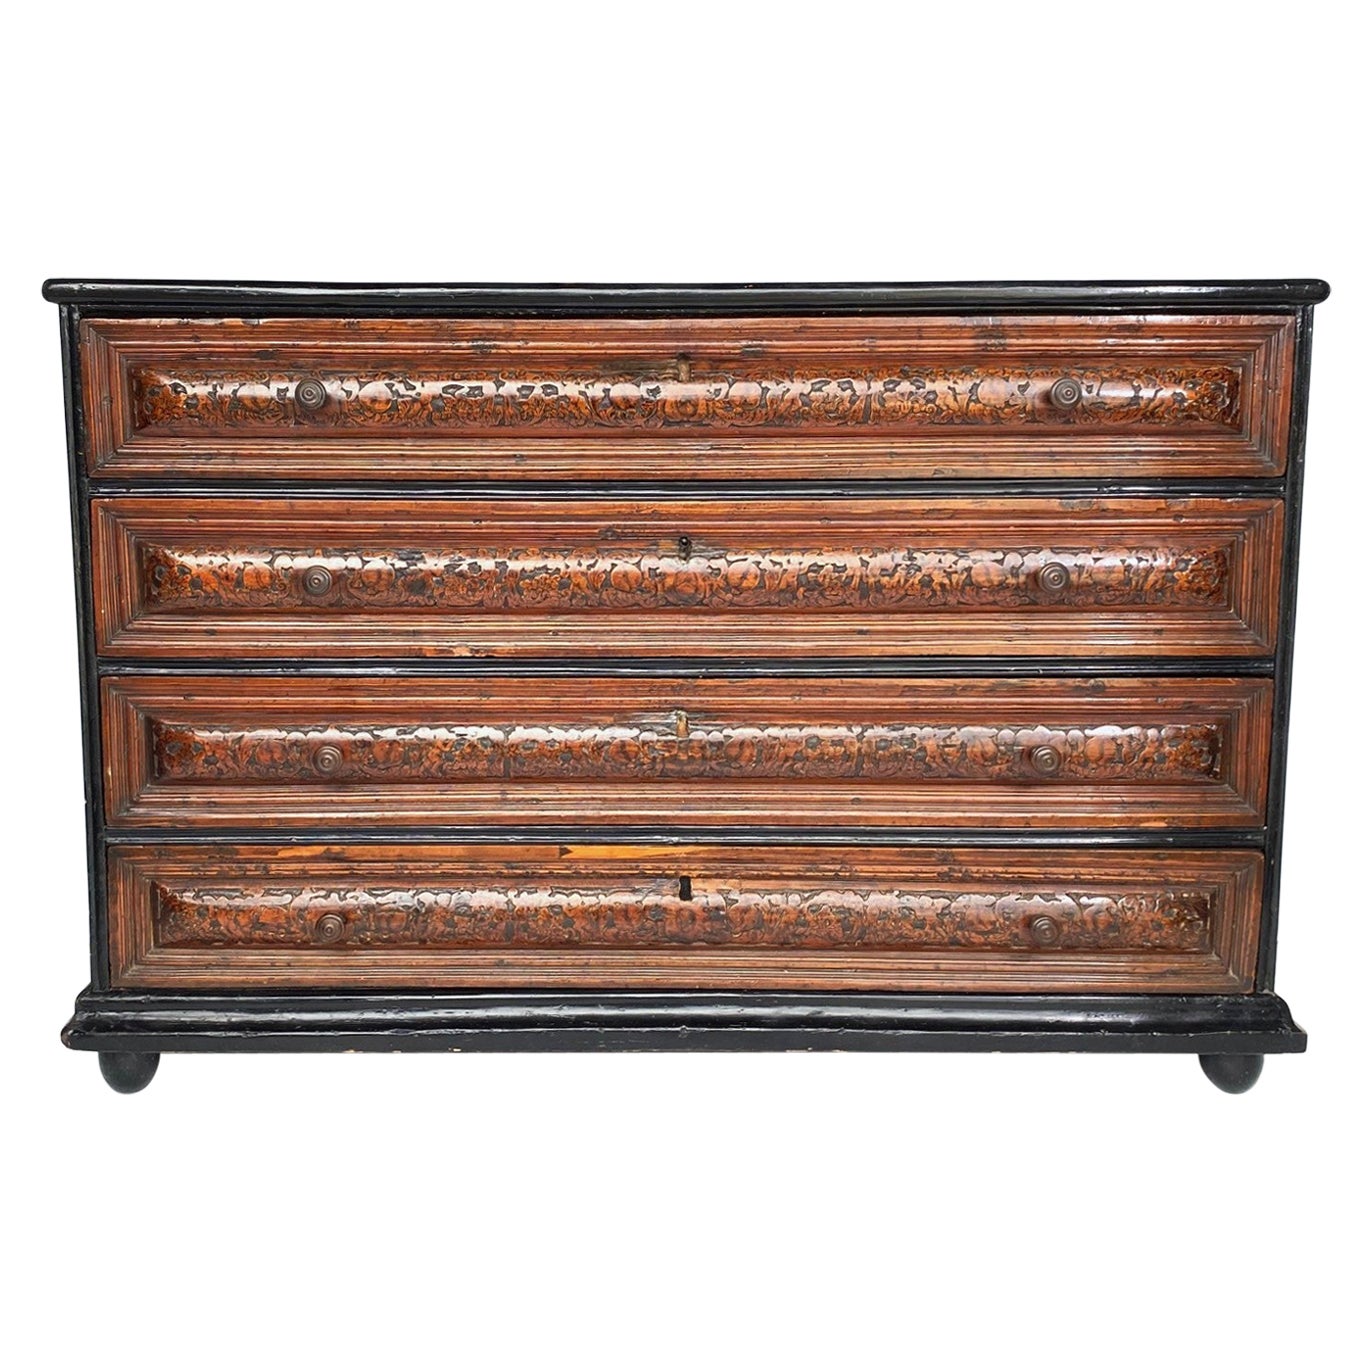 An Antique Italian Chest / Dresser Carved with a Warrior on Horseback  c1750 For Sale